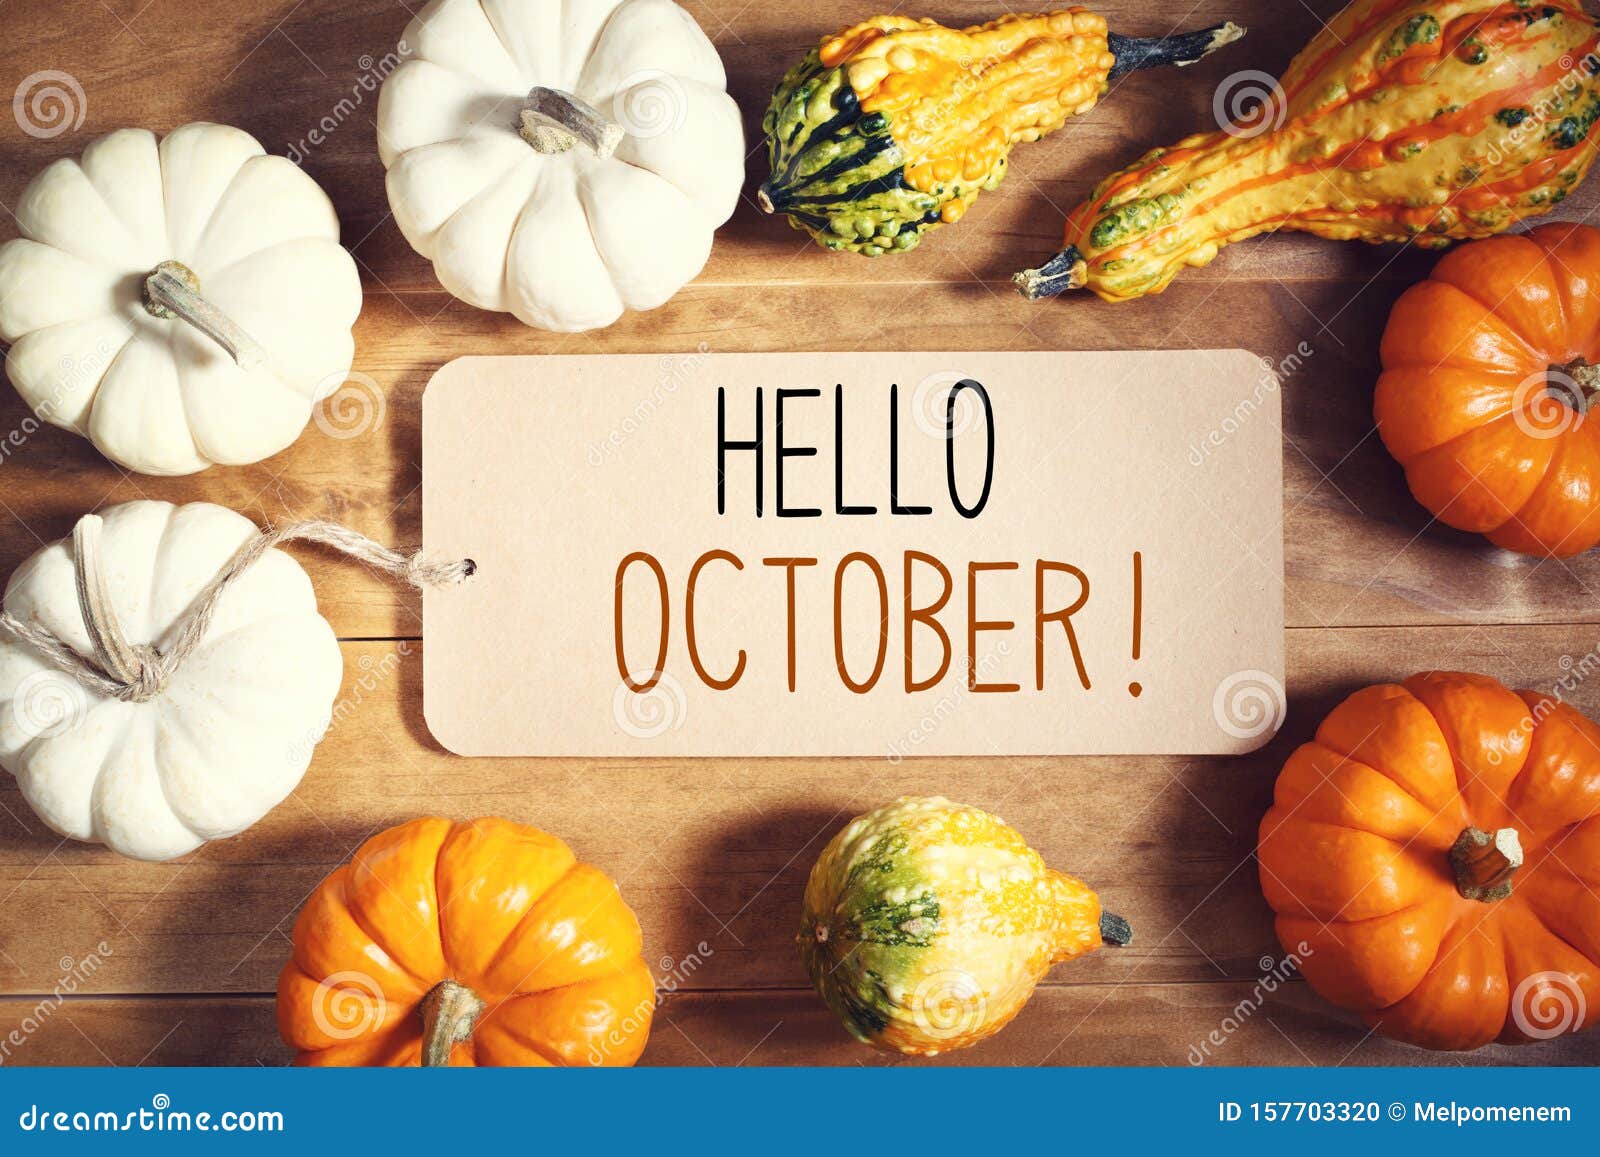 hello october message with collection of pumpkins